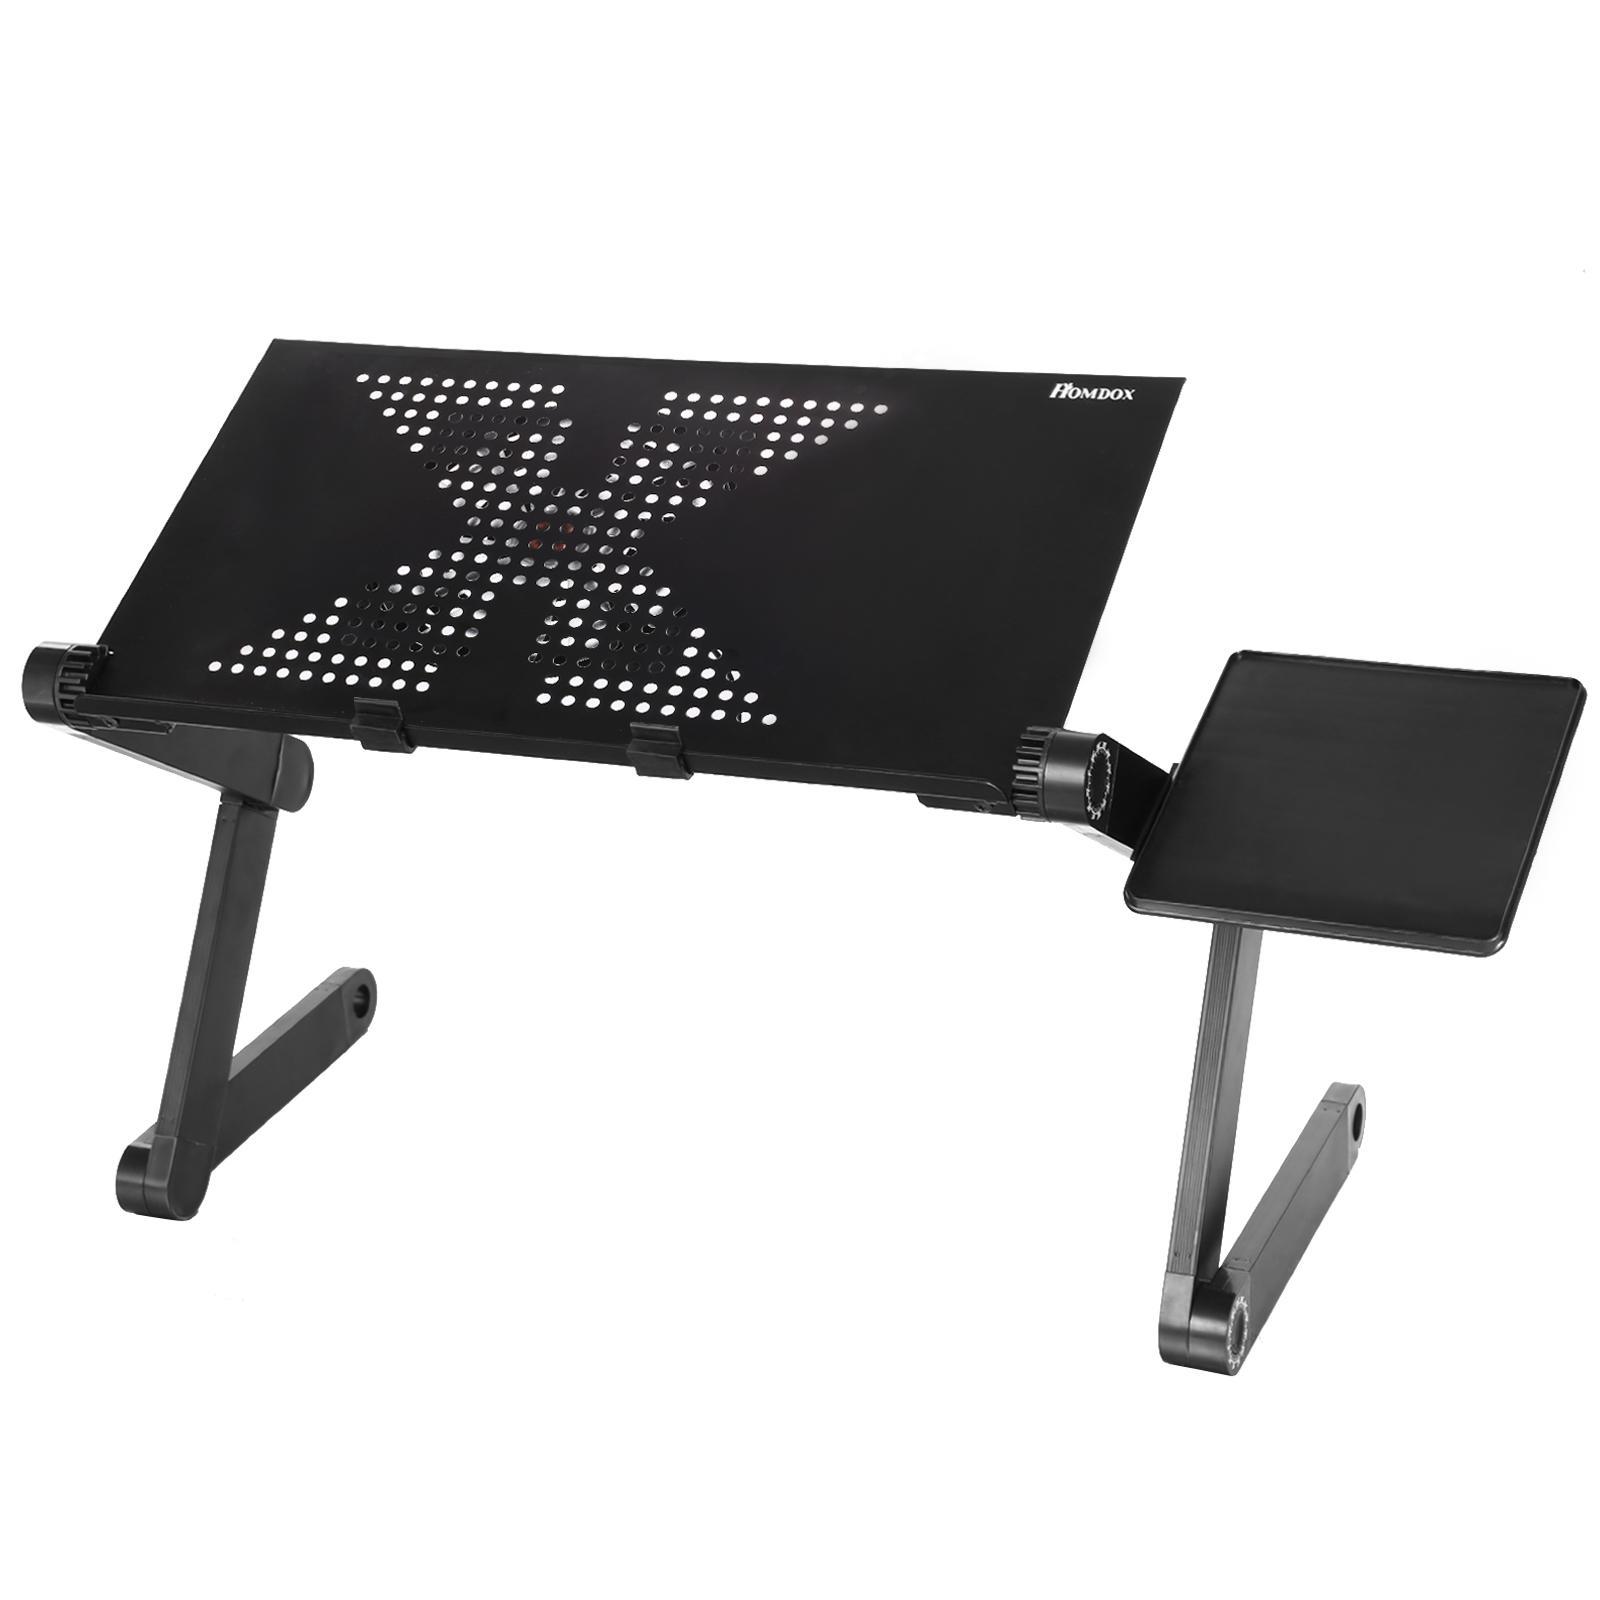 Portable Laptop Table Stand with Mouse Board Cooling Fan Pad Fully Adjustable-Light Weight Aluminum-Black Bed Tray Desk Book HPPY - image 2 of 8